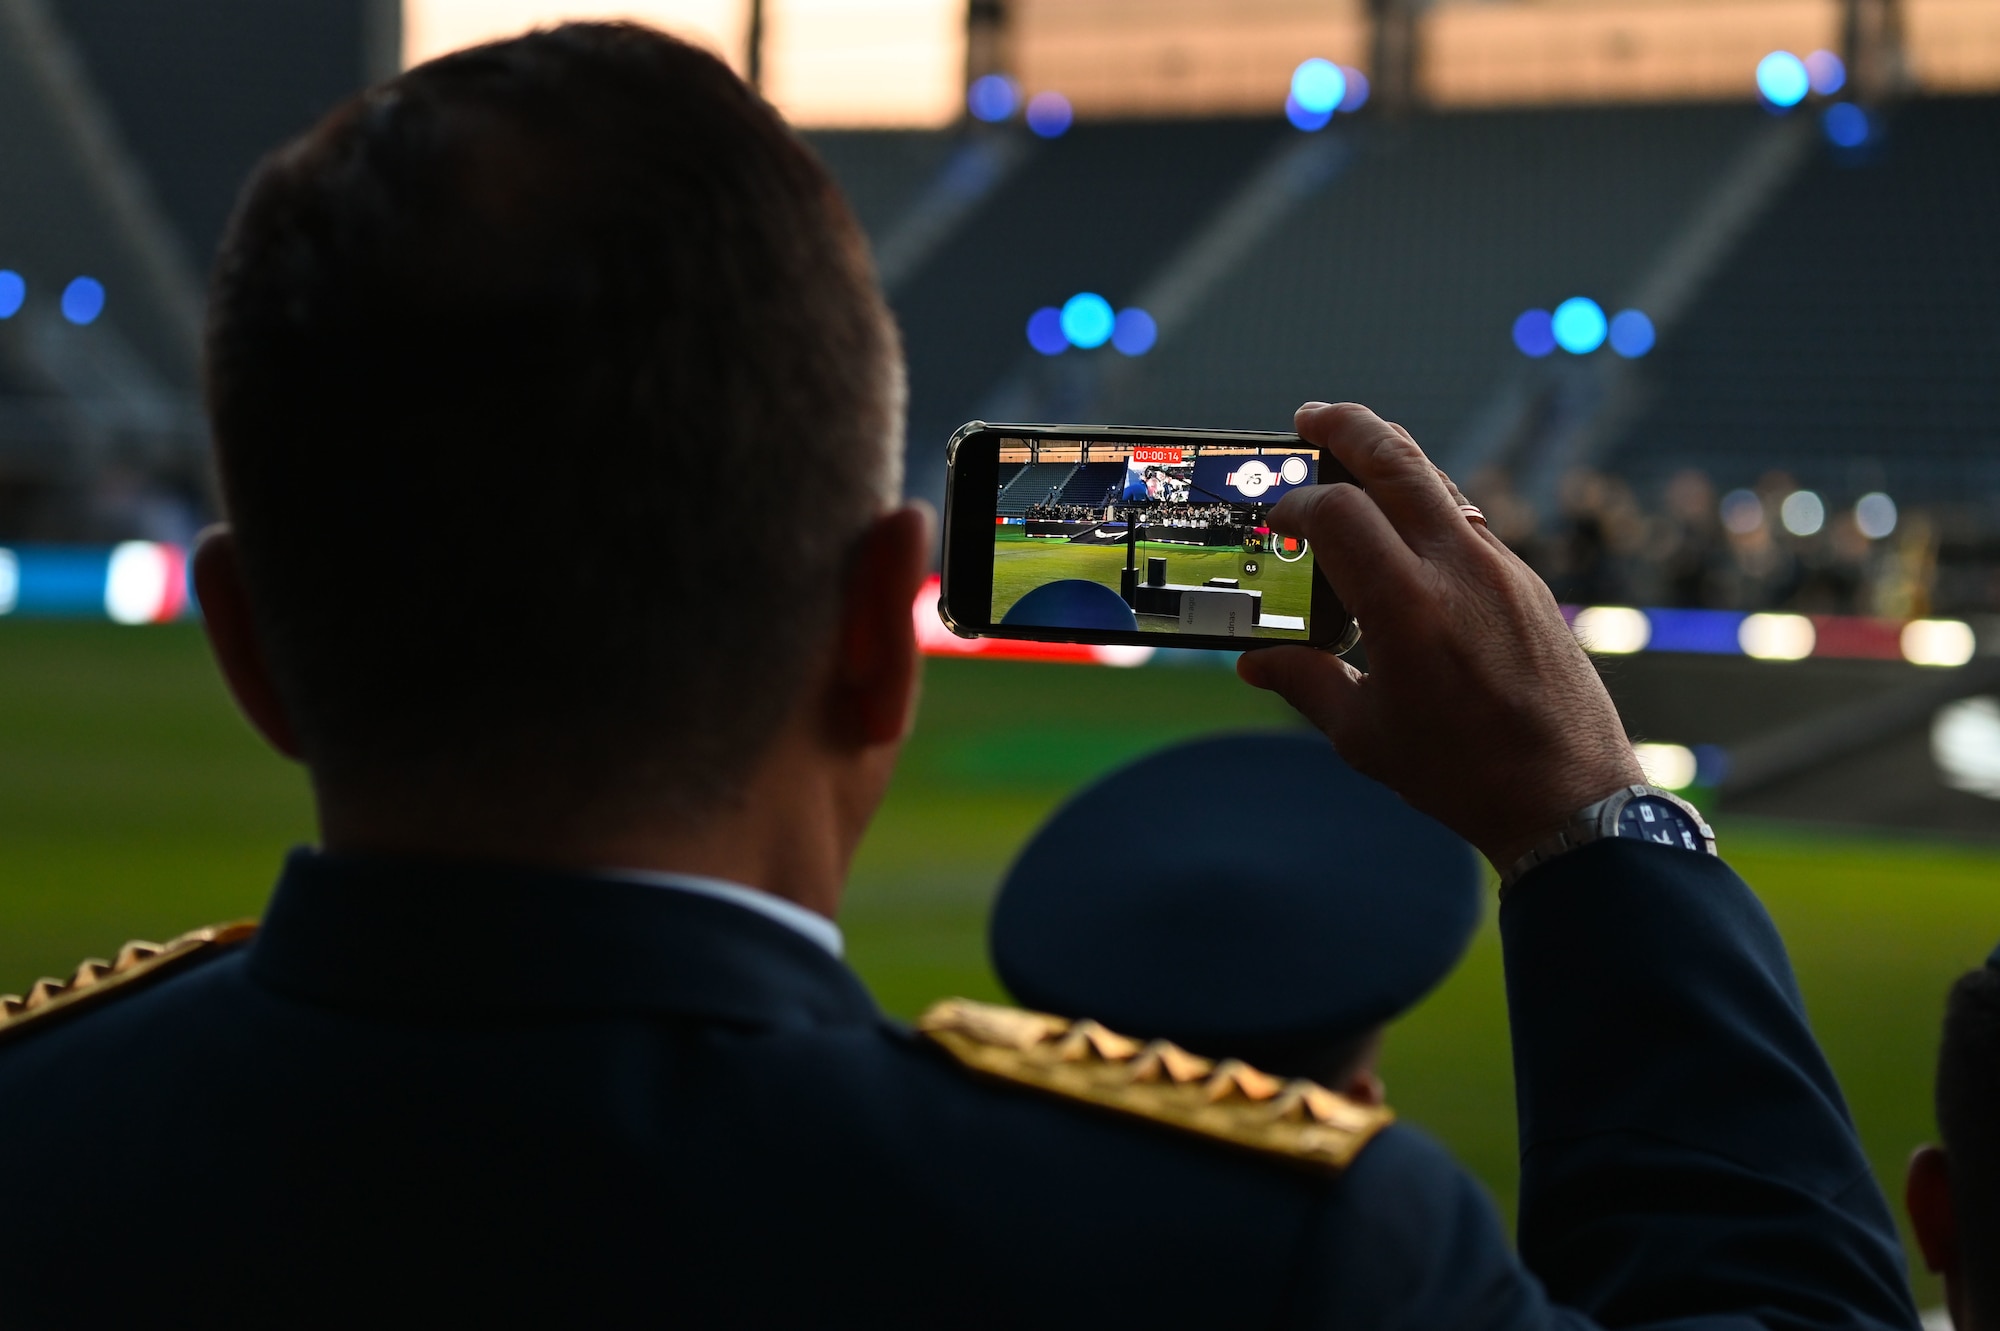 One of the international air chiefs in attendance at the Air Force 75th Anniversary Tattoo records The United States Air Force Band performance Sept. 15, 2022, at Audi Field, Washington, D.C. Nearly 50 international air chiefs were in attendance at the Tattoo in honor of the unity and collective power the U.S. has built with its international partners and allies. (U.S. Air Force photo by Staff Sgt. Nilsa Garcia)